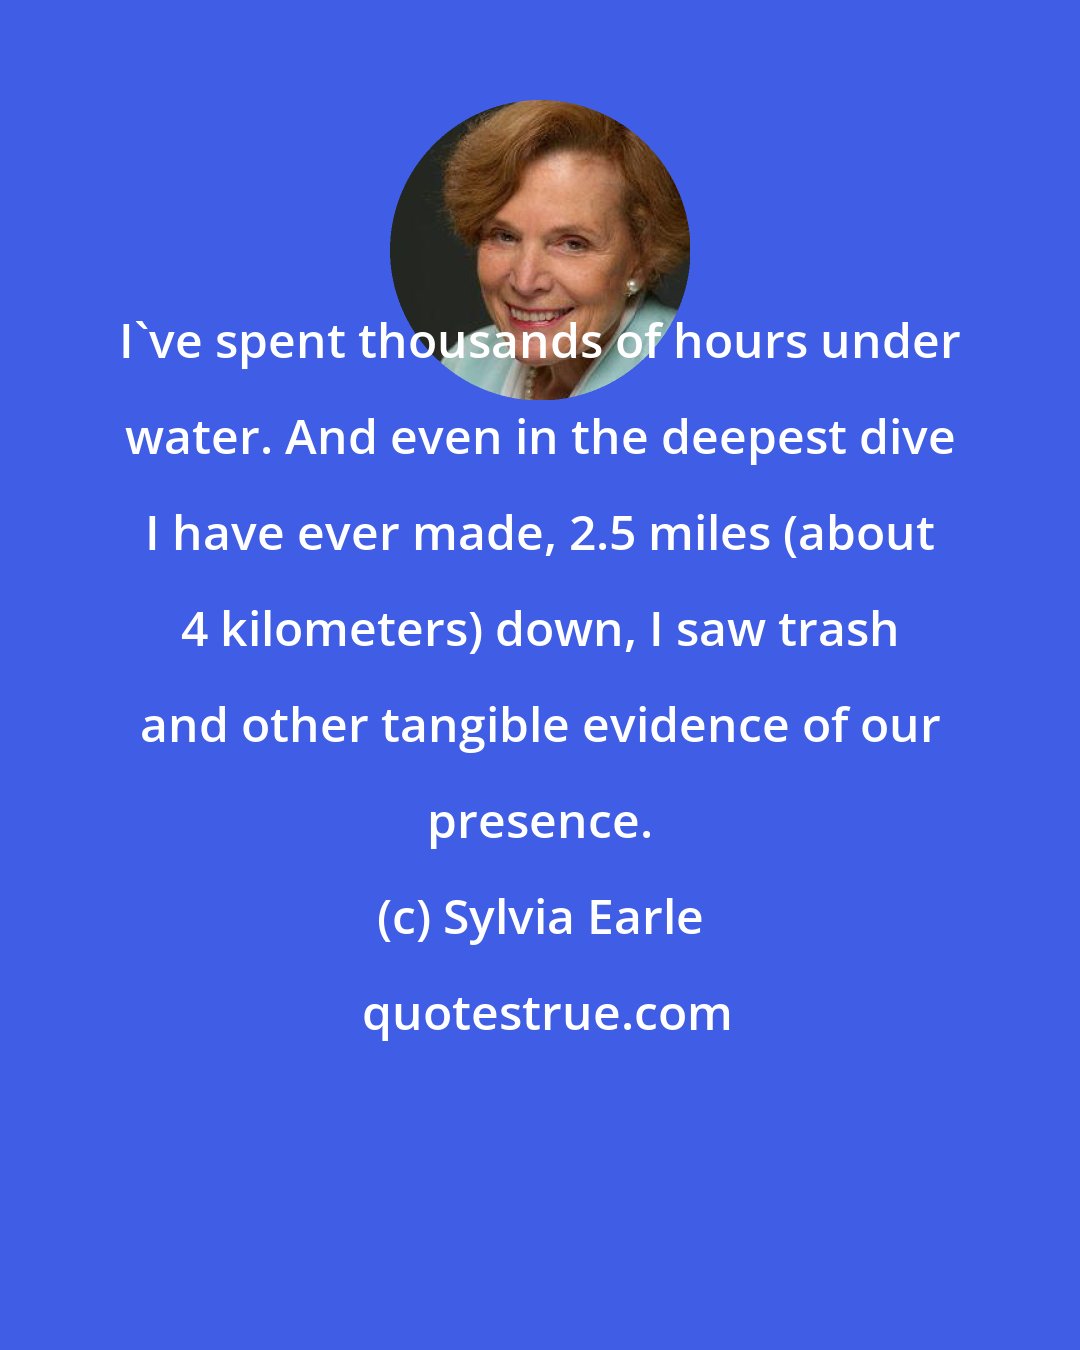 Sylvia Earle: I've spent thousands of hours under water. And even in the deepest dive I have ever made, 2.5 miles (about 4 kilometers) down, I saw trash and other tangible evidence of our presence.